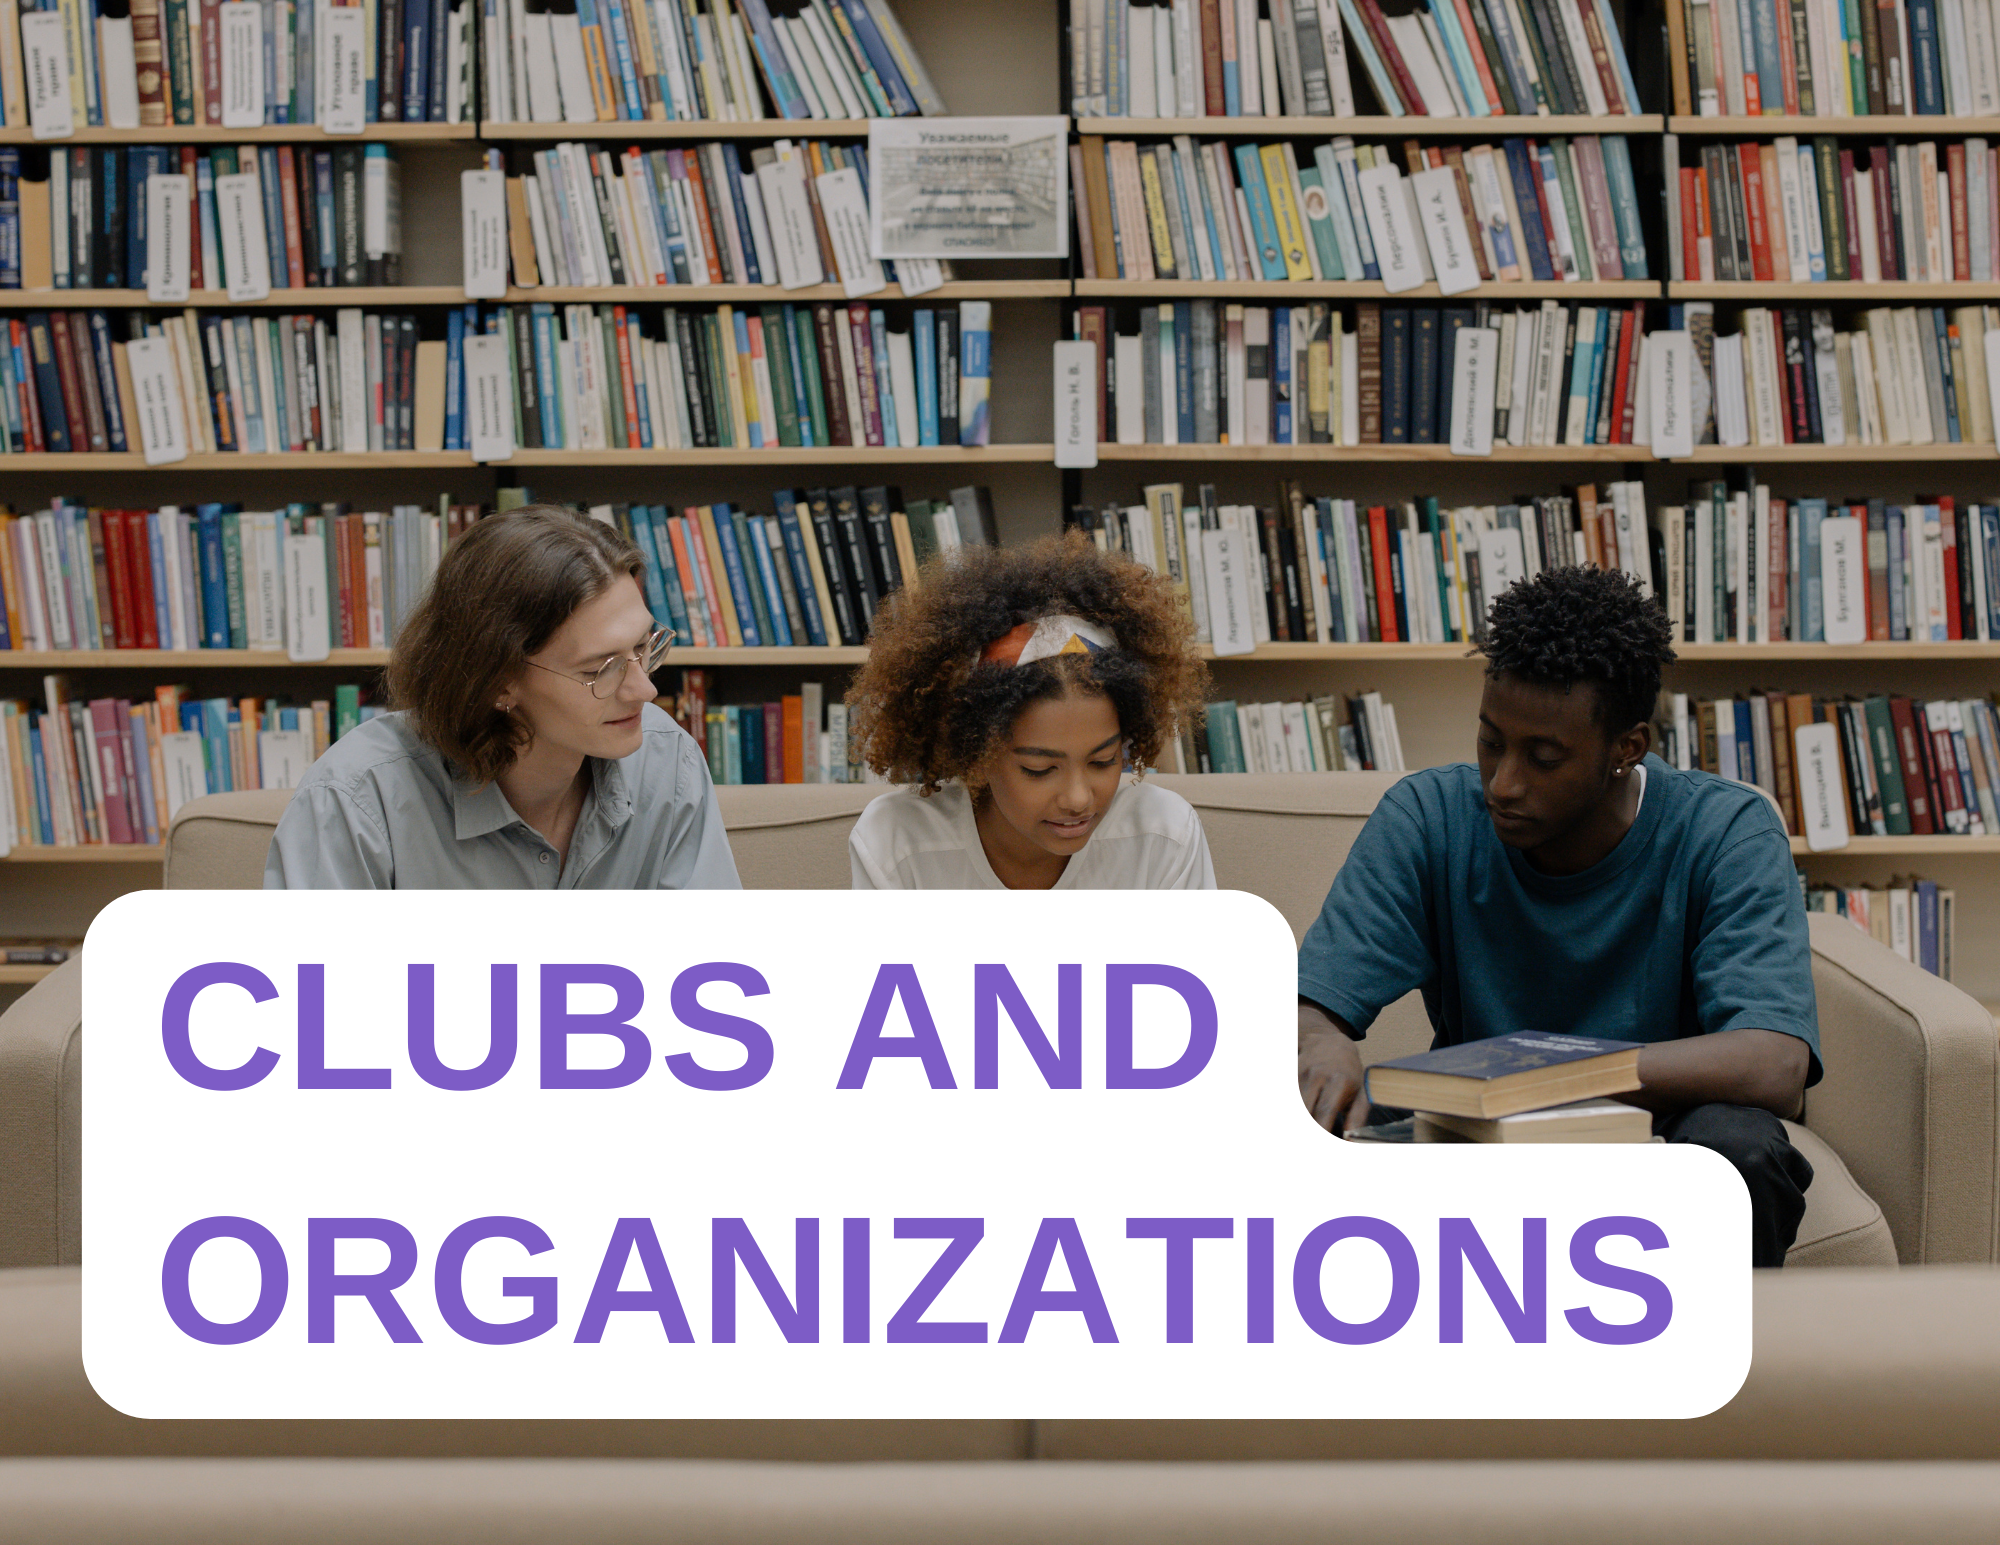 AGIS Clubs and Organizations